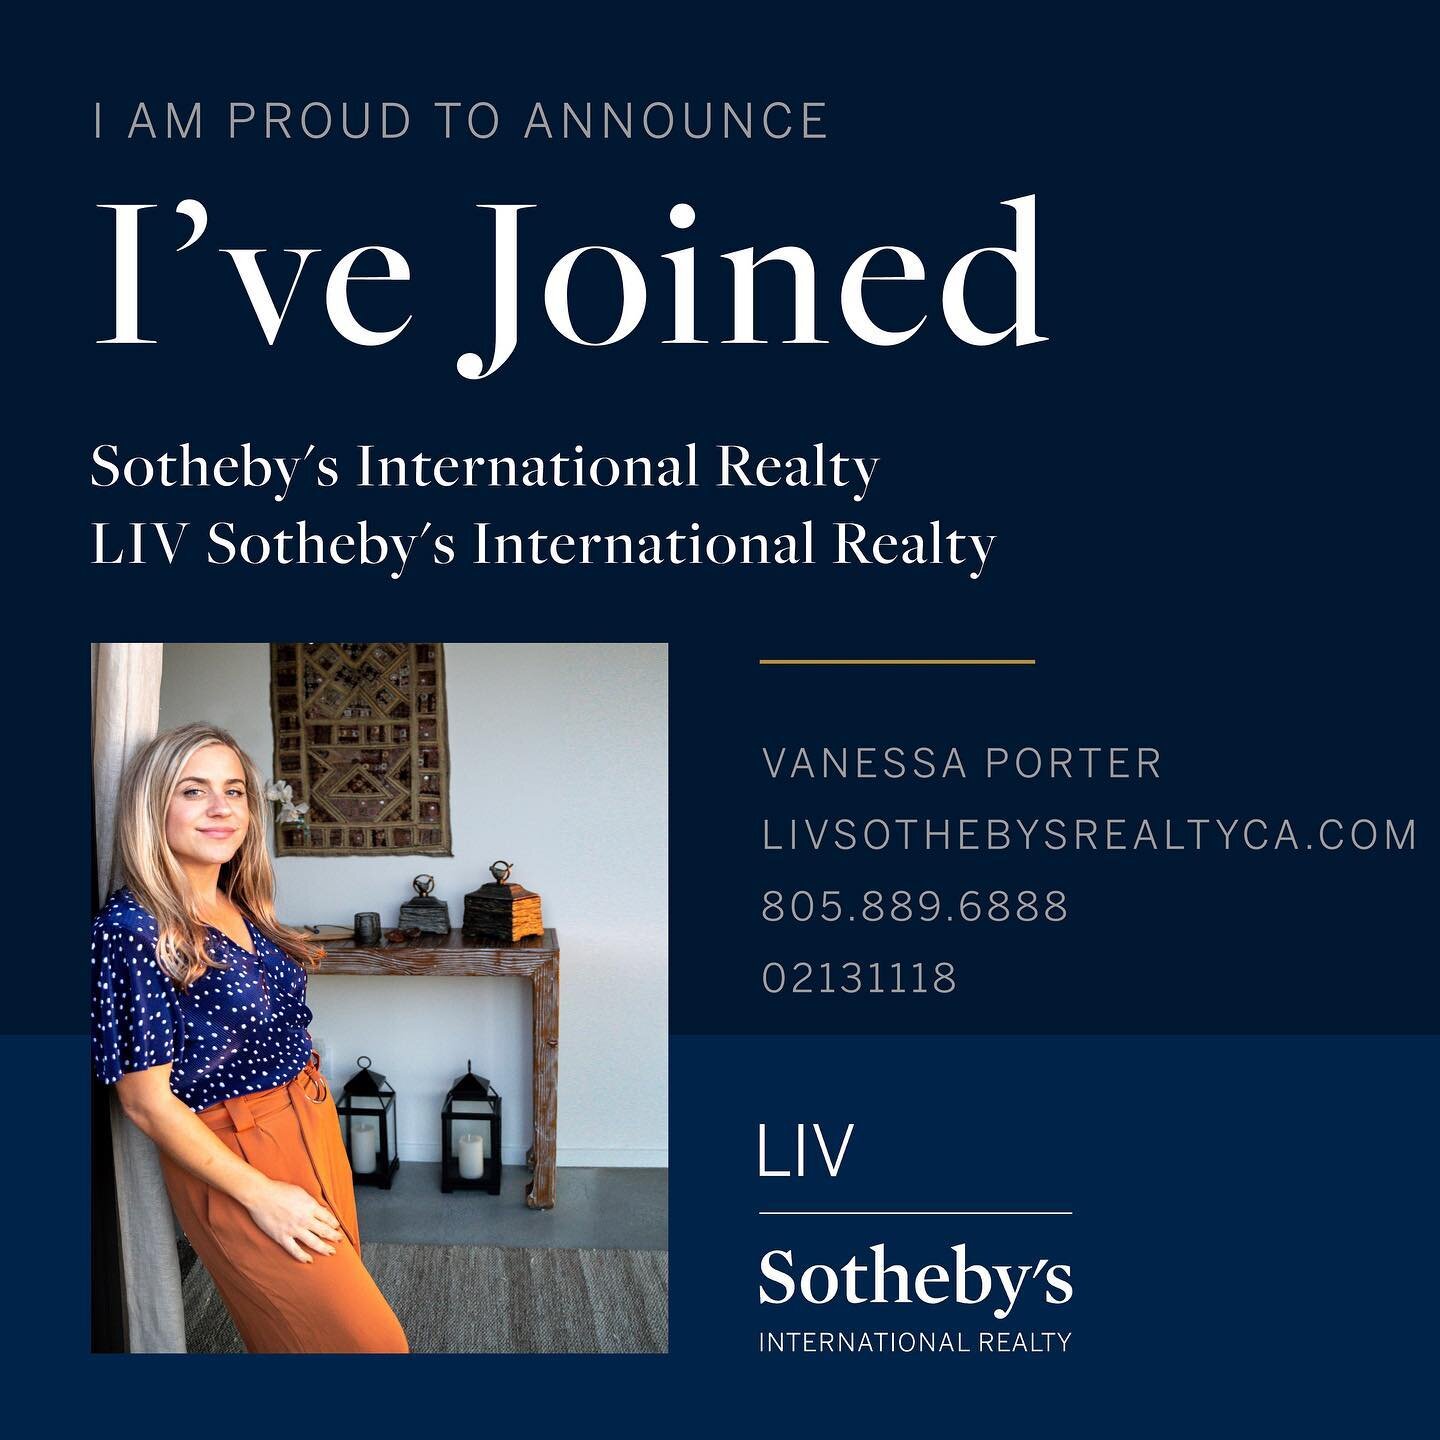 So honored to share the update that I&rsquo;ve joined @livsothebysrealtyca 💙

To be welcomed to this brokerage is only a reflection of the incredible work we did &amp; mentorship I received at Better Homes &amp; Gardens Property Shoppe with The PoGo